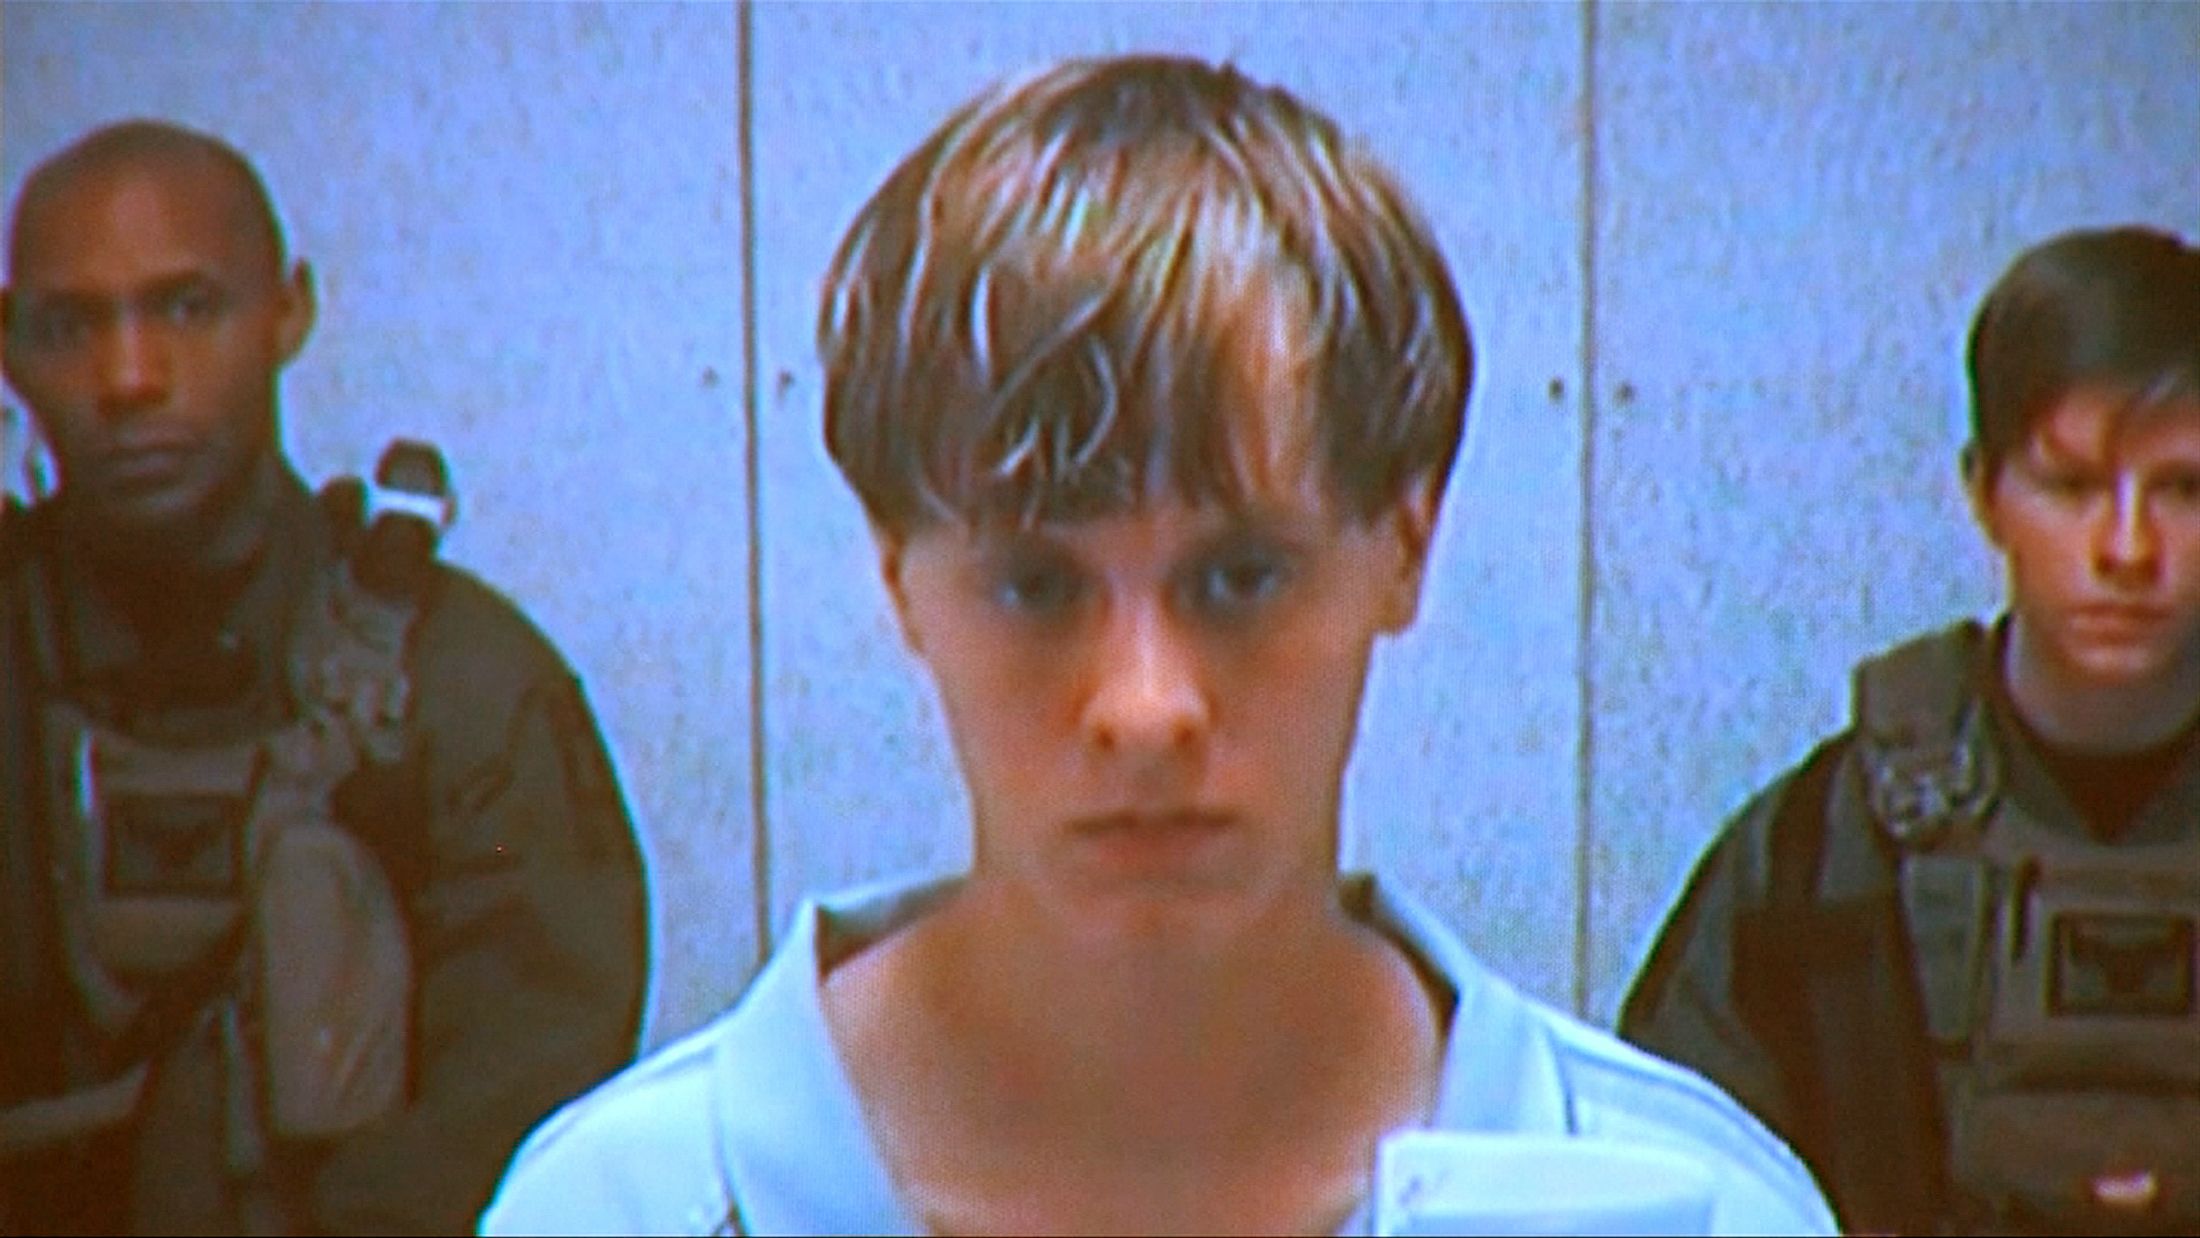 DylannRoof1